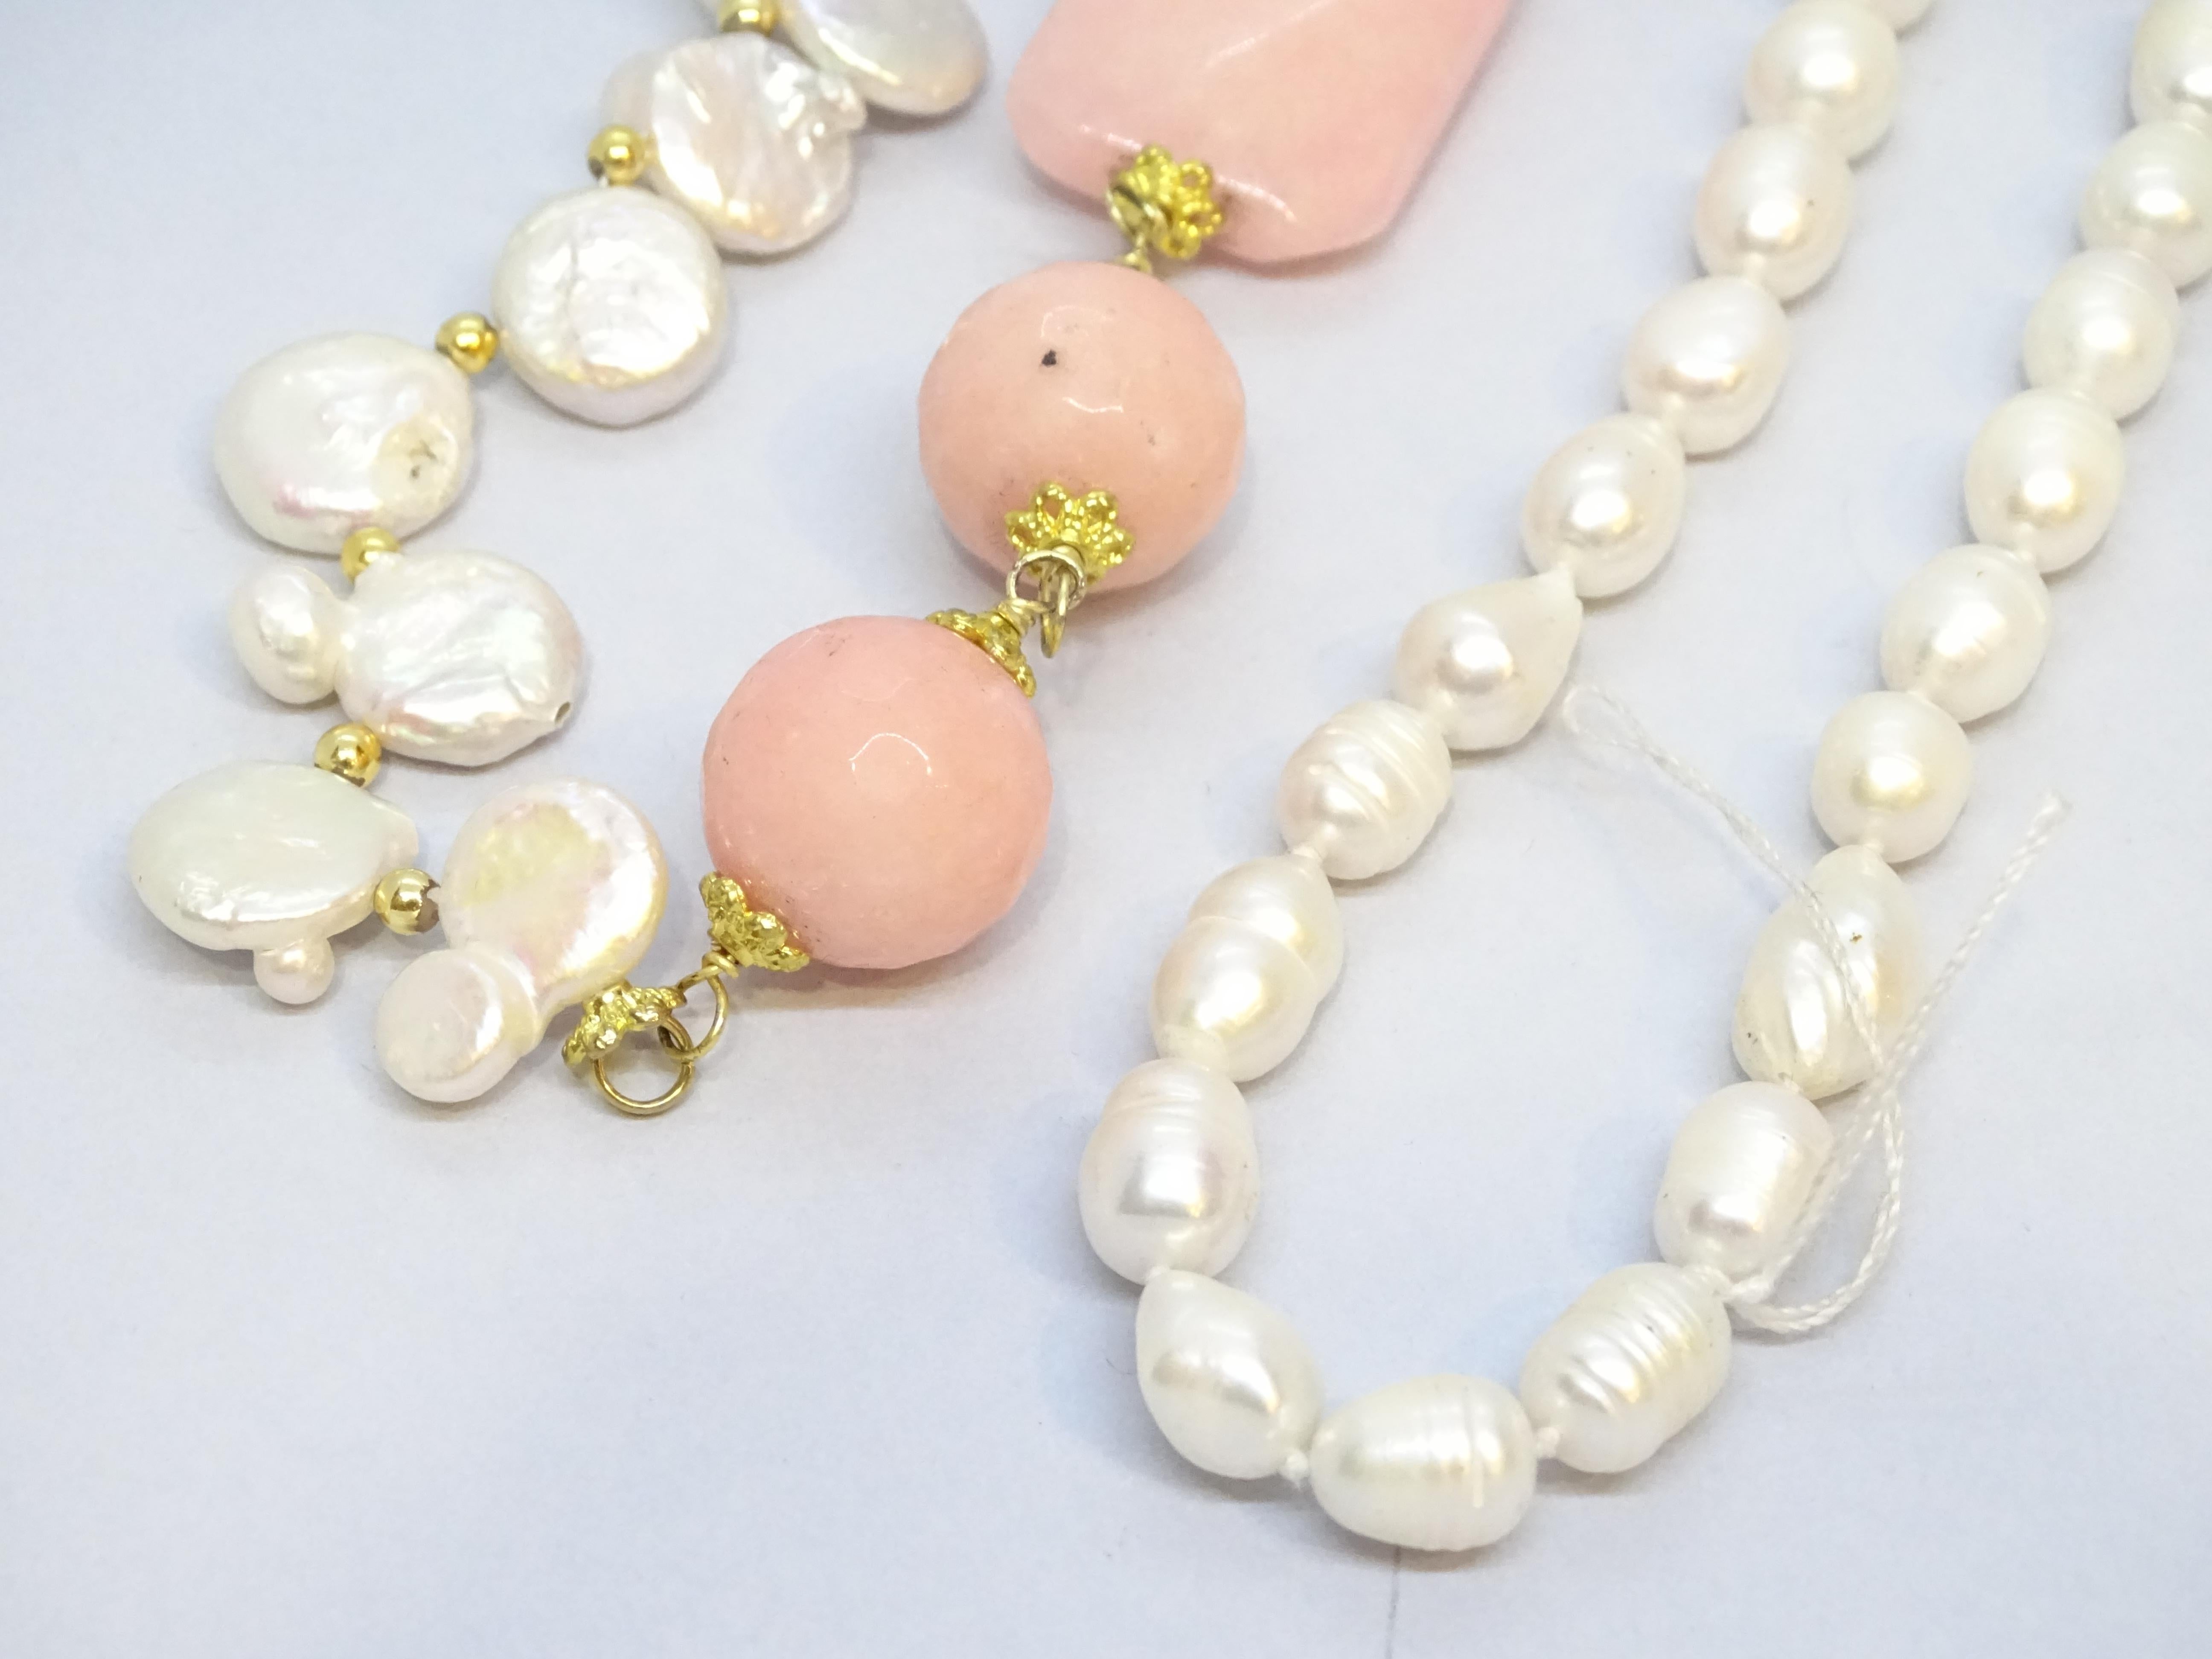 Italian necklace with baroque pearls, rose quartz and enamel For Sale 3